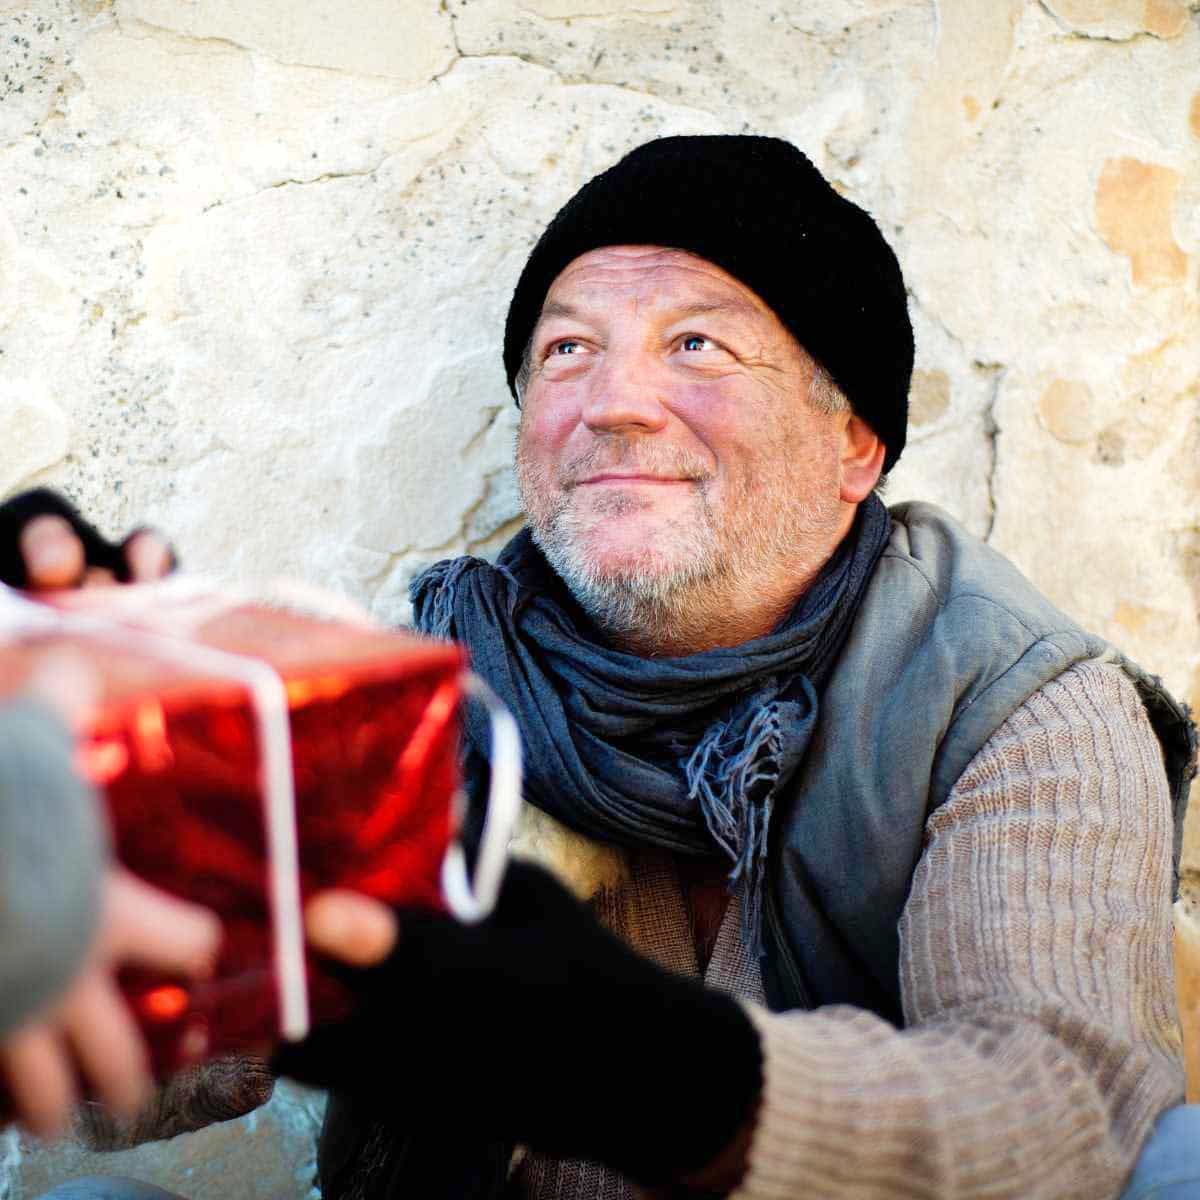 A homeless man smiling as he is handed a Christmas gift wrapped in red wrapping paper.